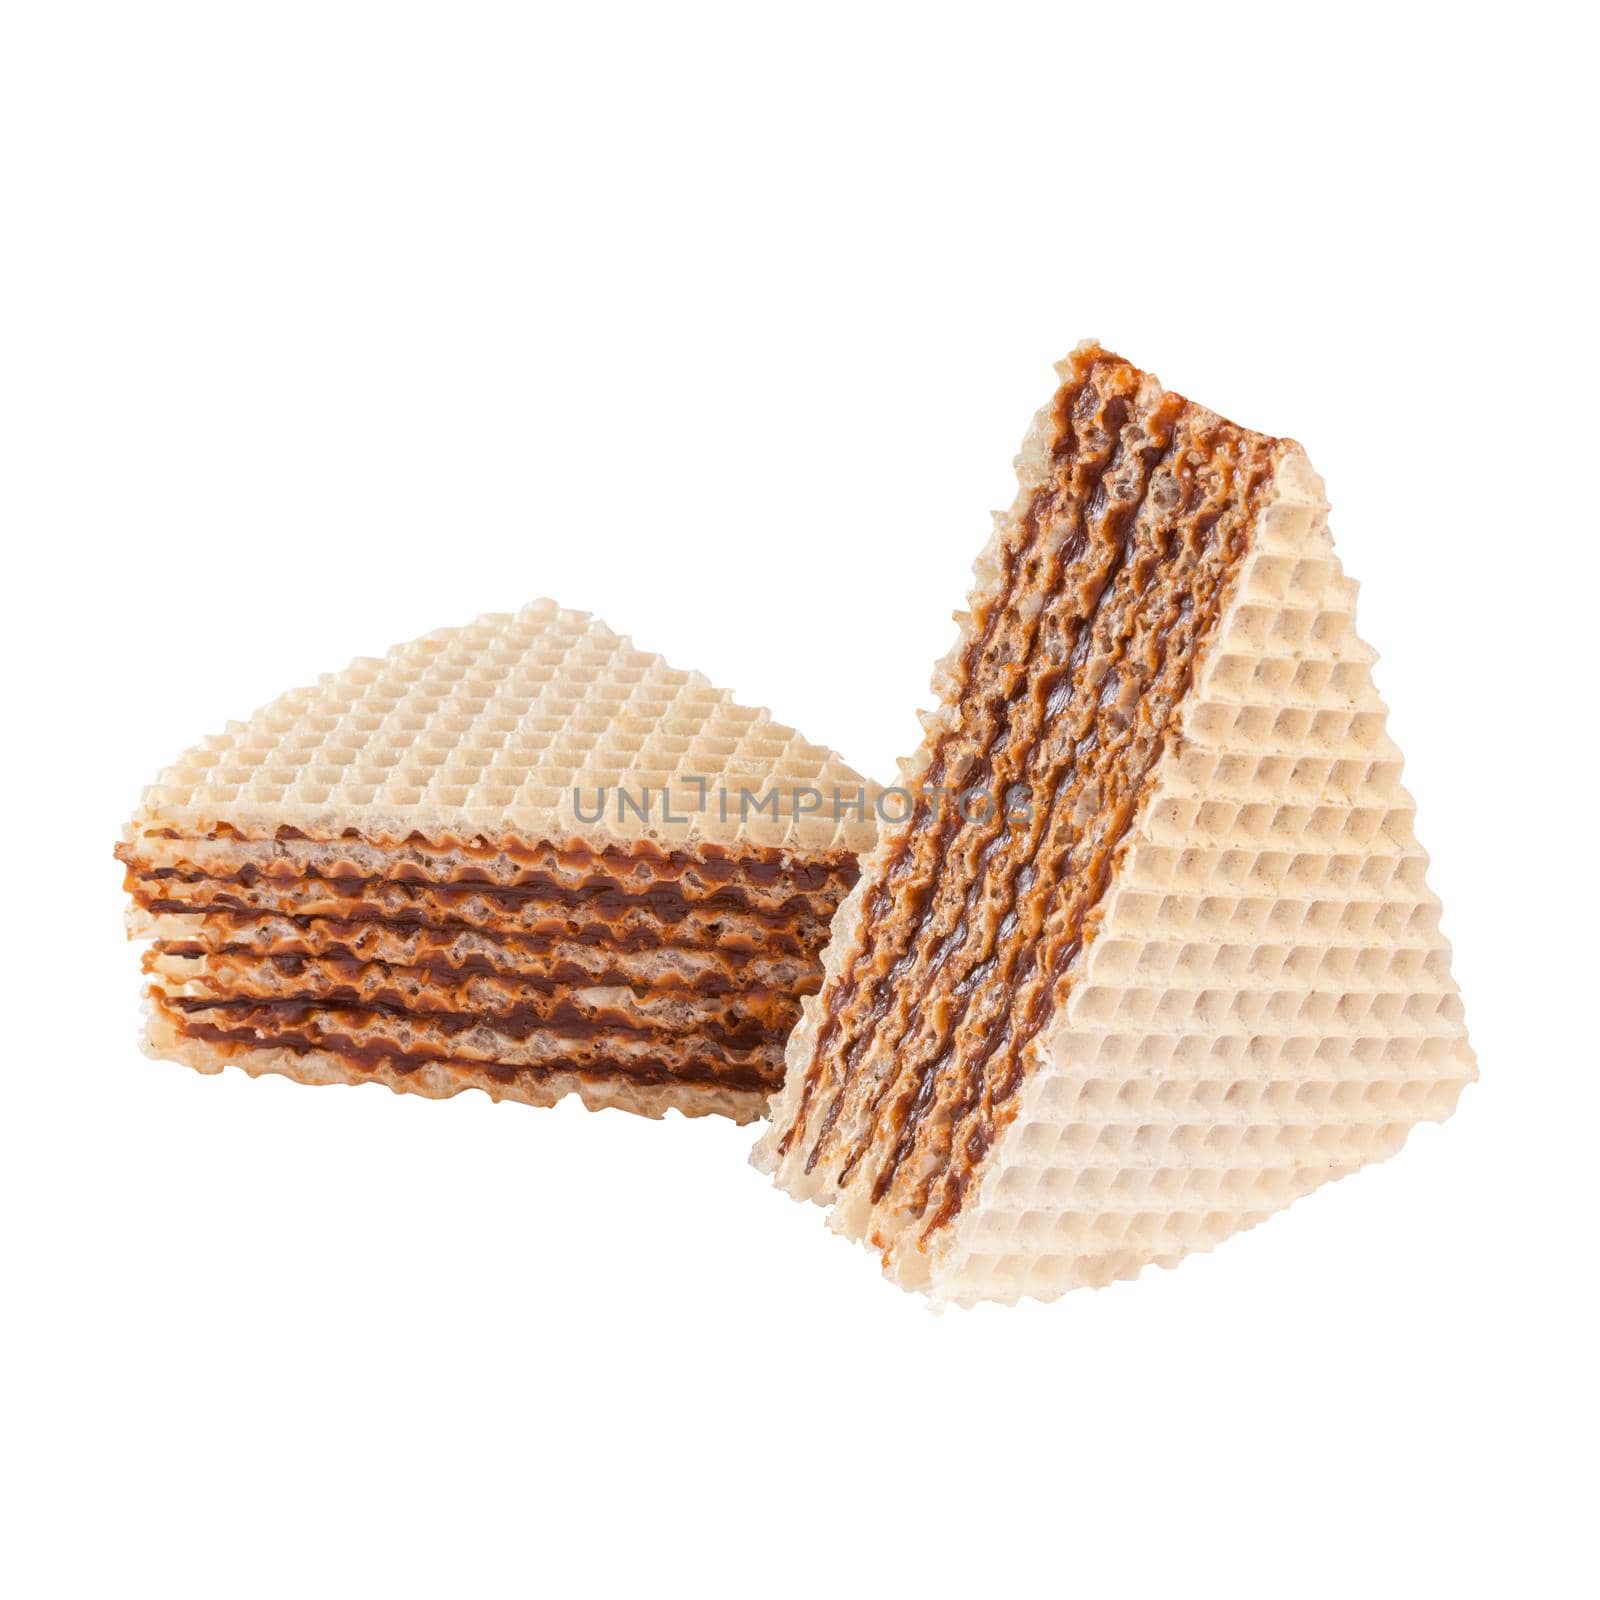 Two slices of traditional ukrainian waffle cake with cooked sweetened condensed milk isolated on white background. Popular sweets